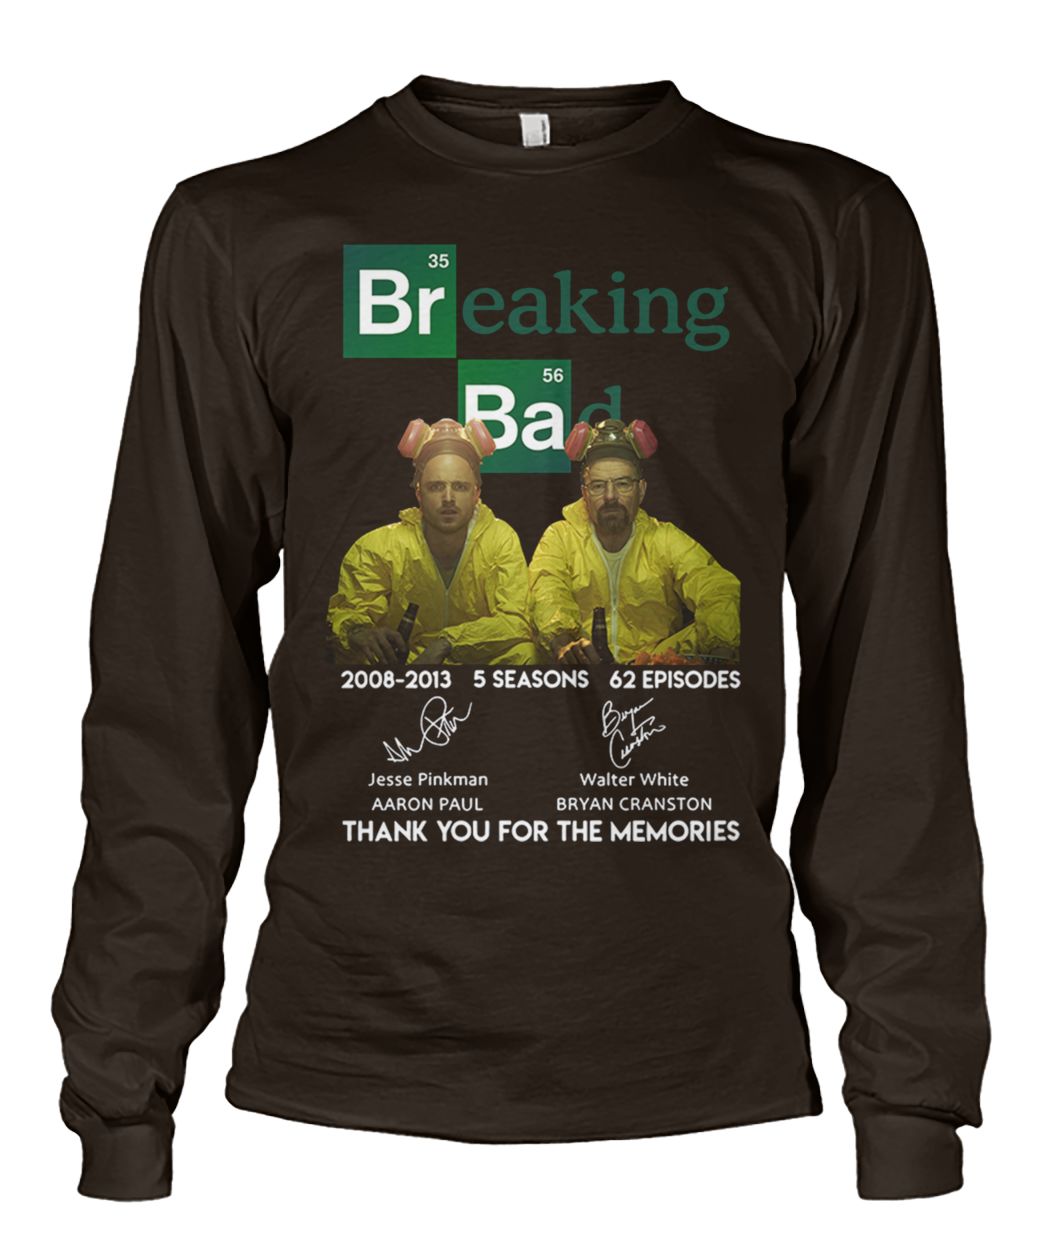 Br Ba Breaking bad 2008 2013 5 seasons 62 episodes thank you for memories signatures unisex long sleeve